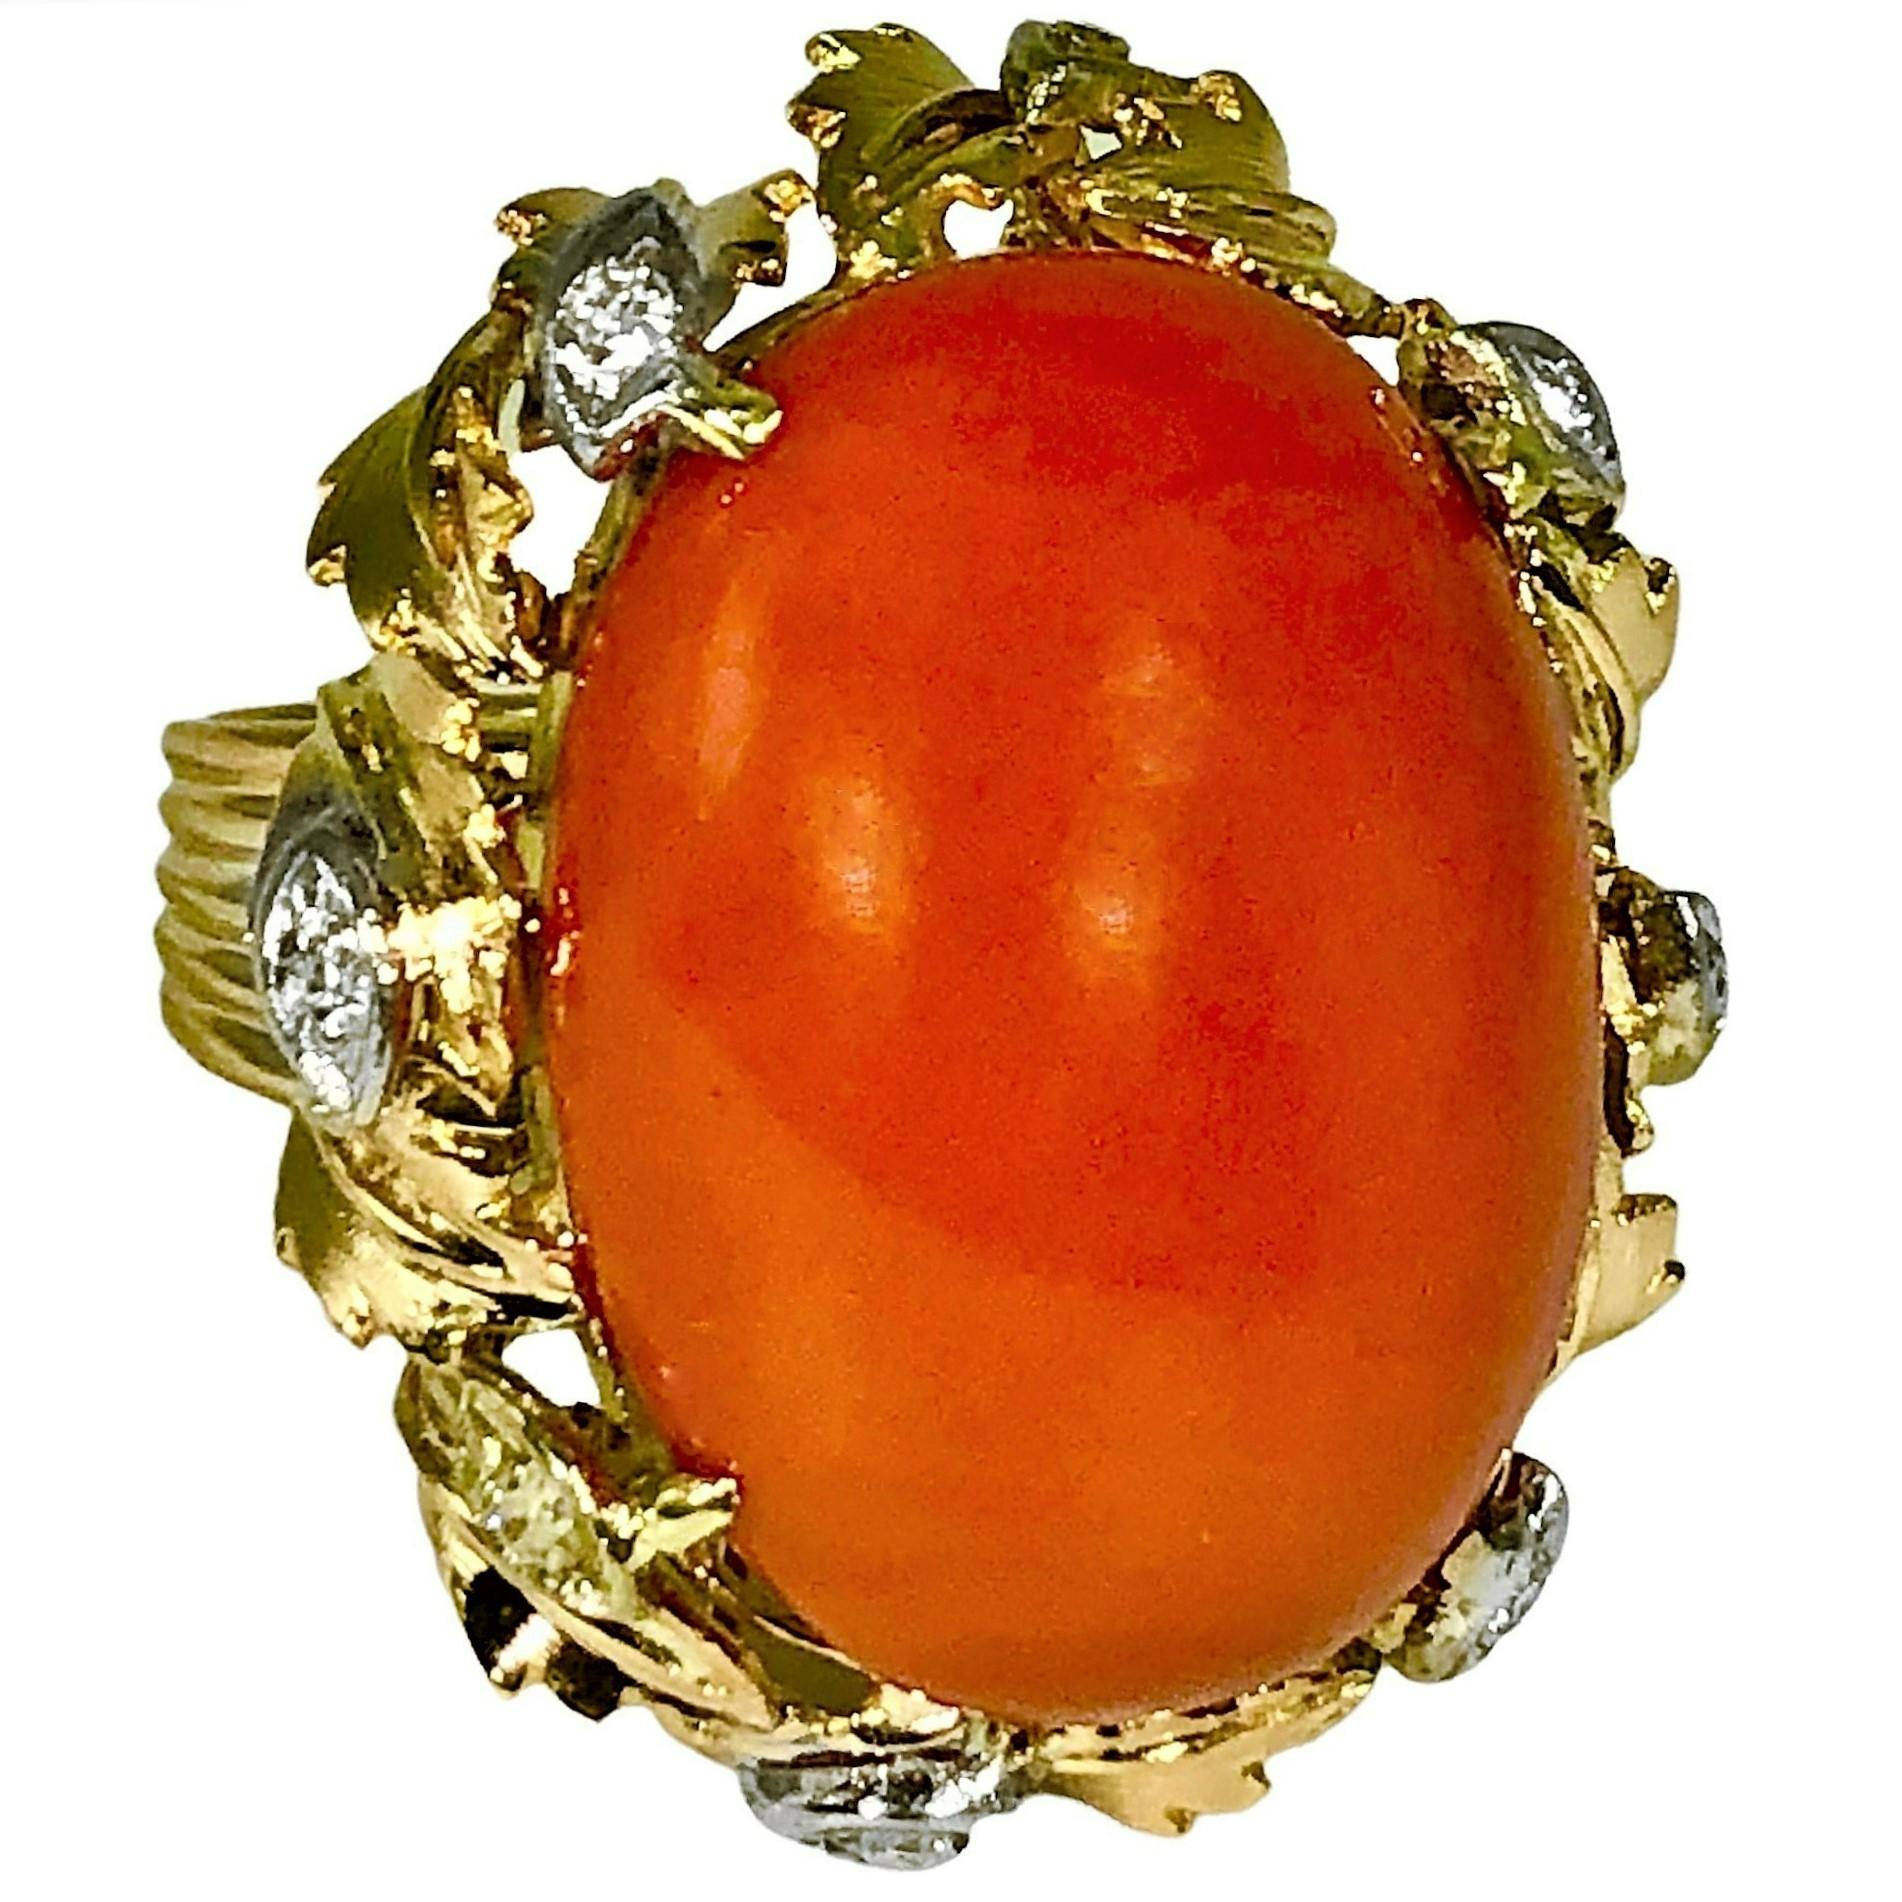 This lovely and quite large vintage fashion ring features, at it's center. a bright orange Mediterranean coral cabochon. With a measurement of 26mm by 19mm, the coral is quite significant and it has not been enhanced in any way. The mounting is